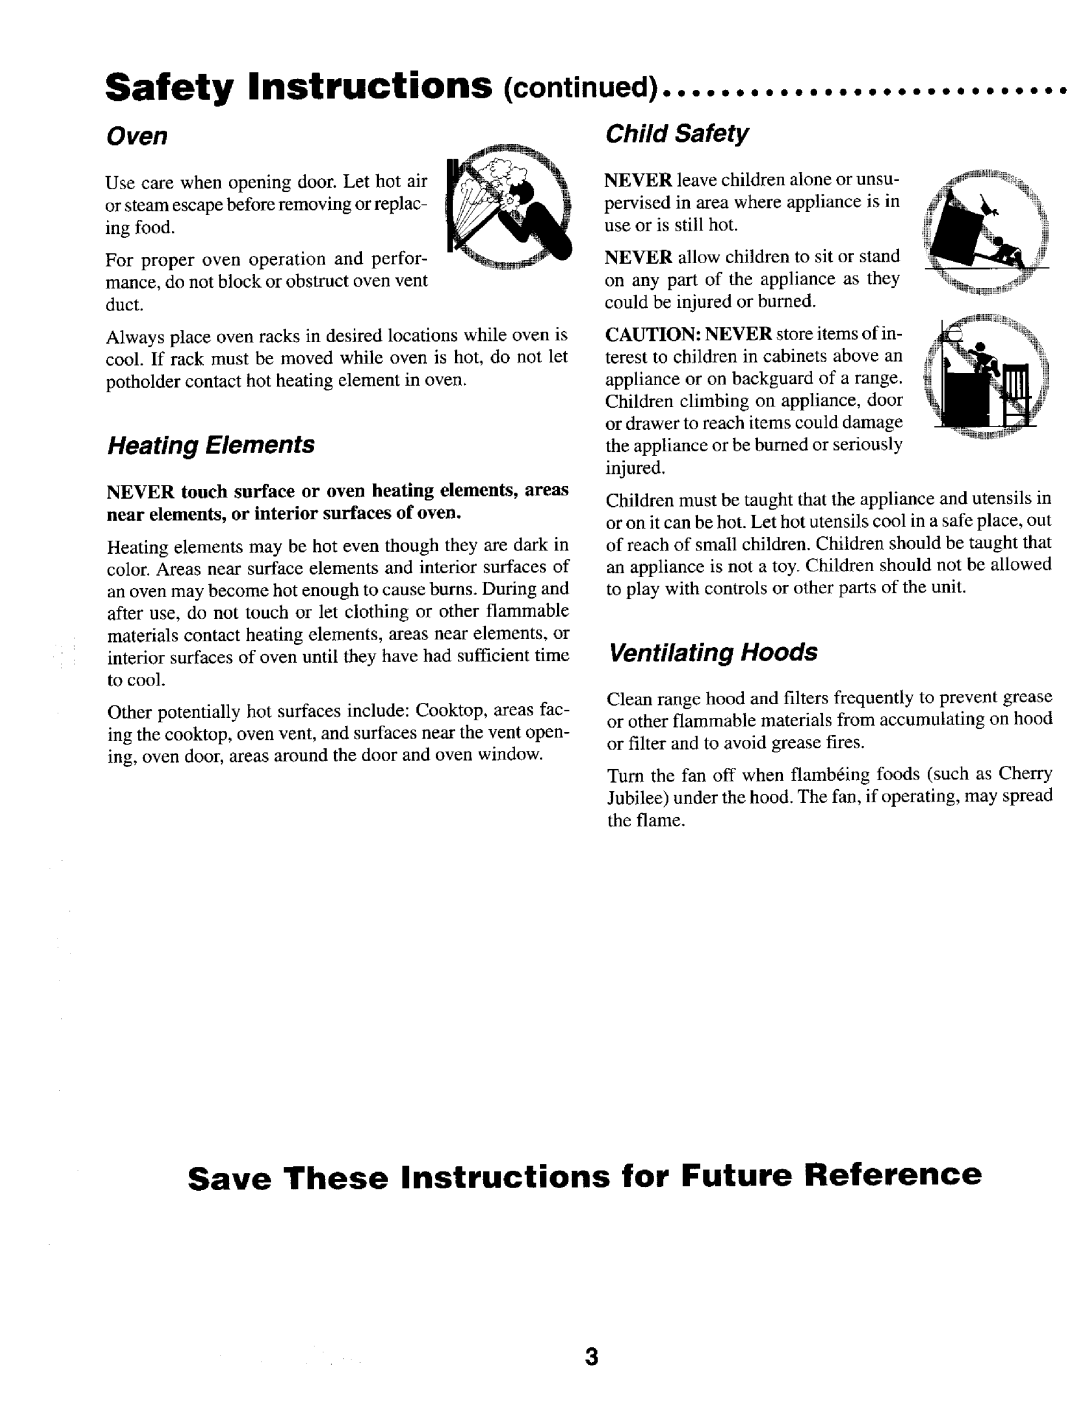 Maytag MER4530 warranty Instructions, Save These instructions for Future Reference, Oven, Child Safety, continued 